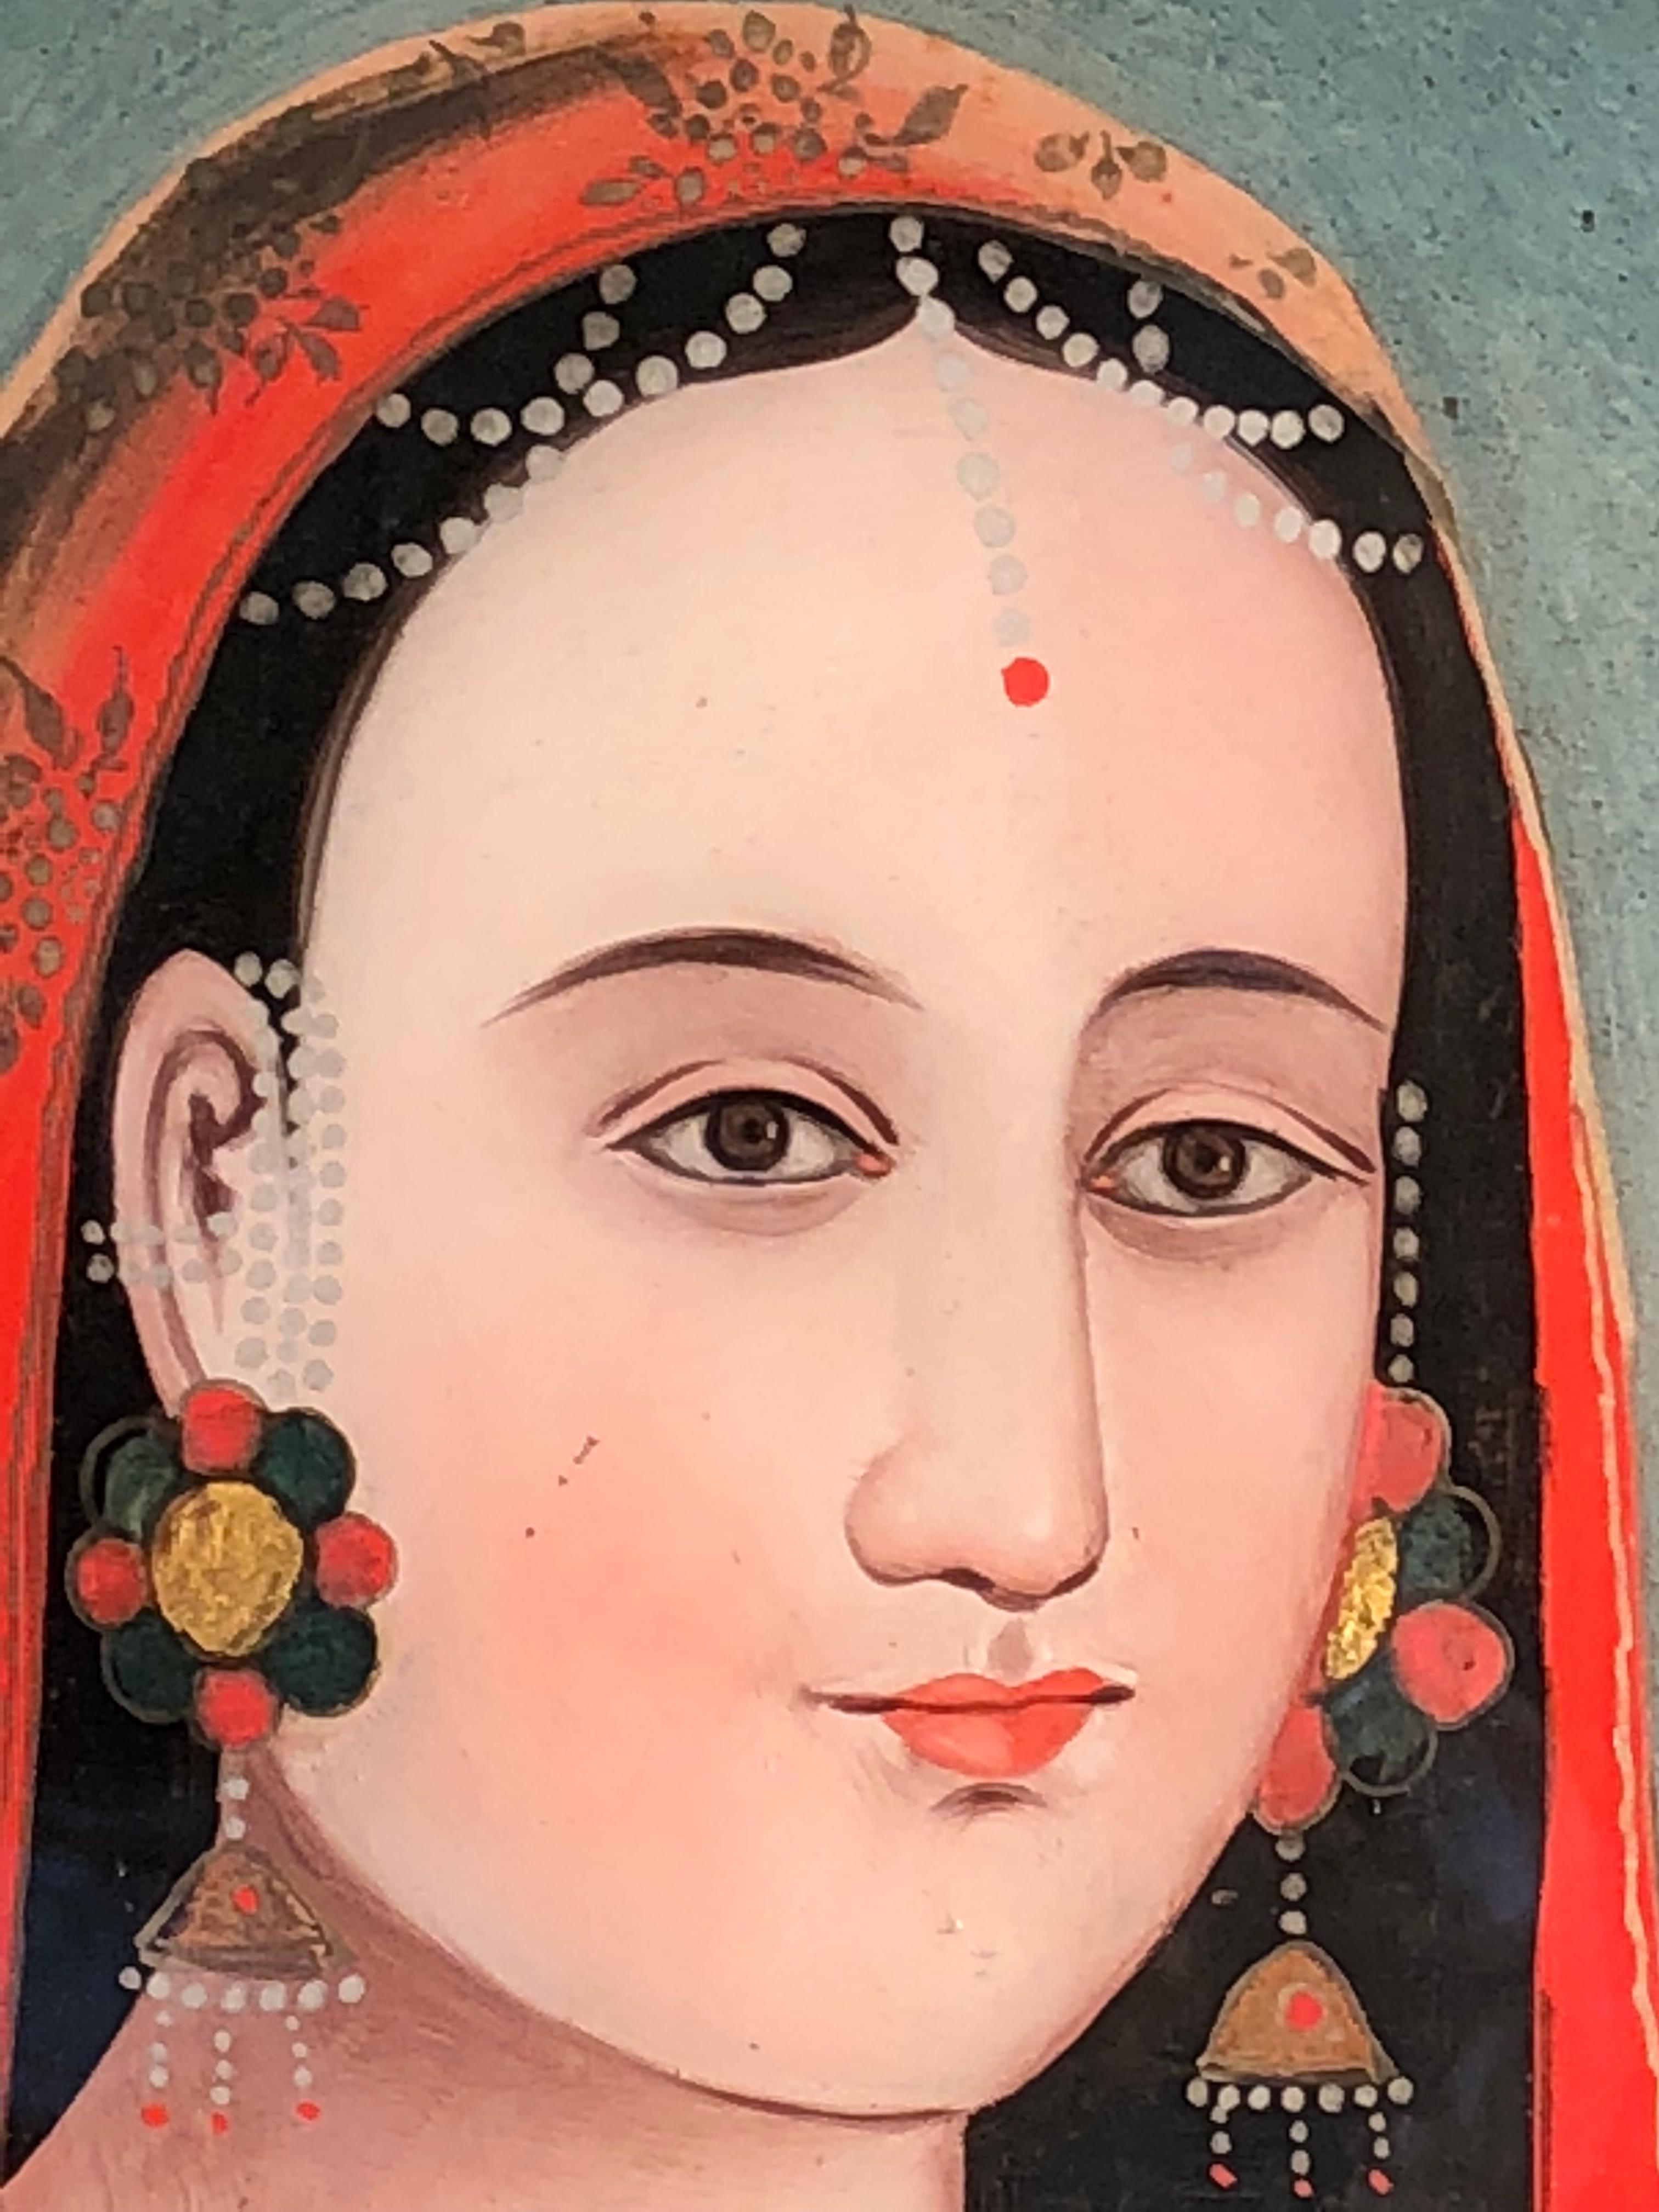 Painted Large Reverse Painting on Glass, India, 19th Century